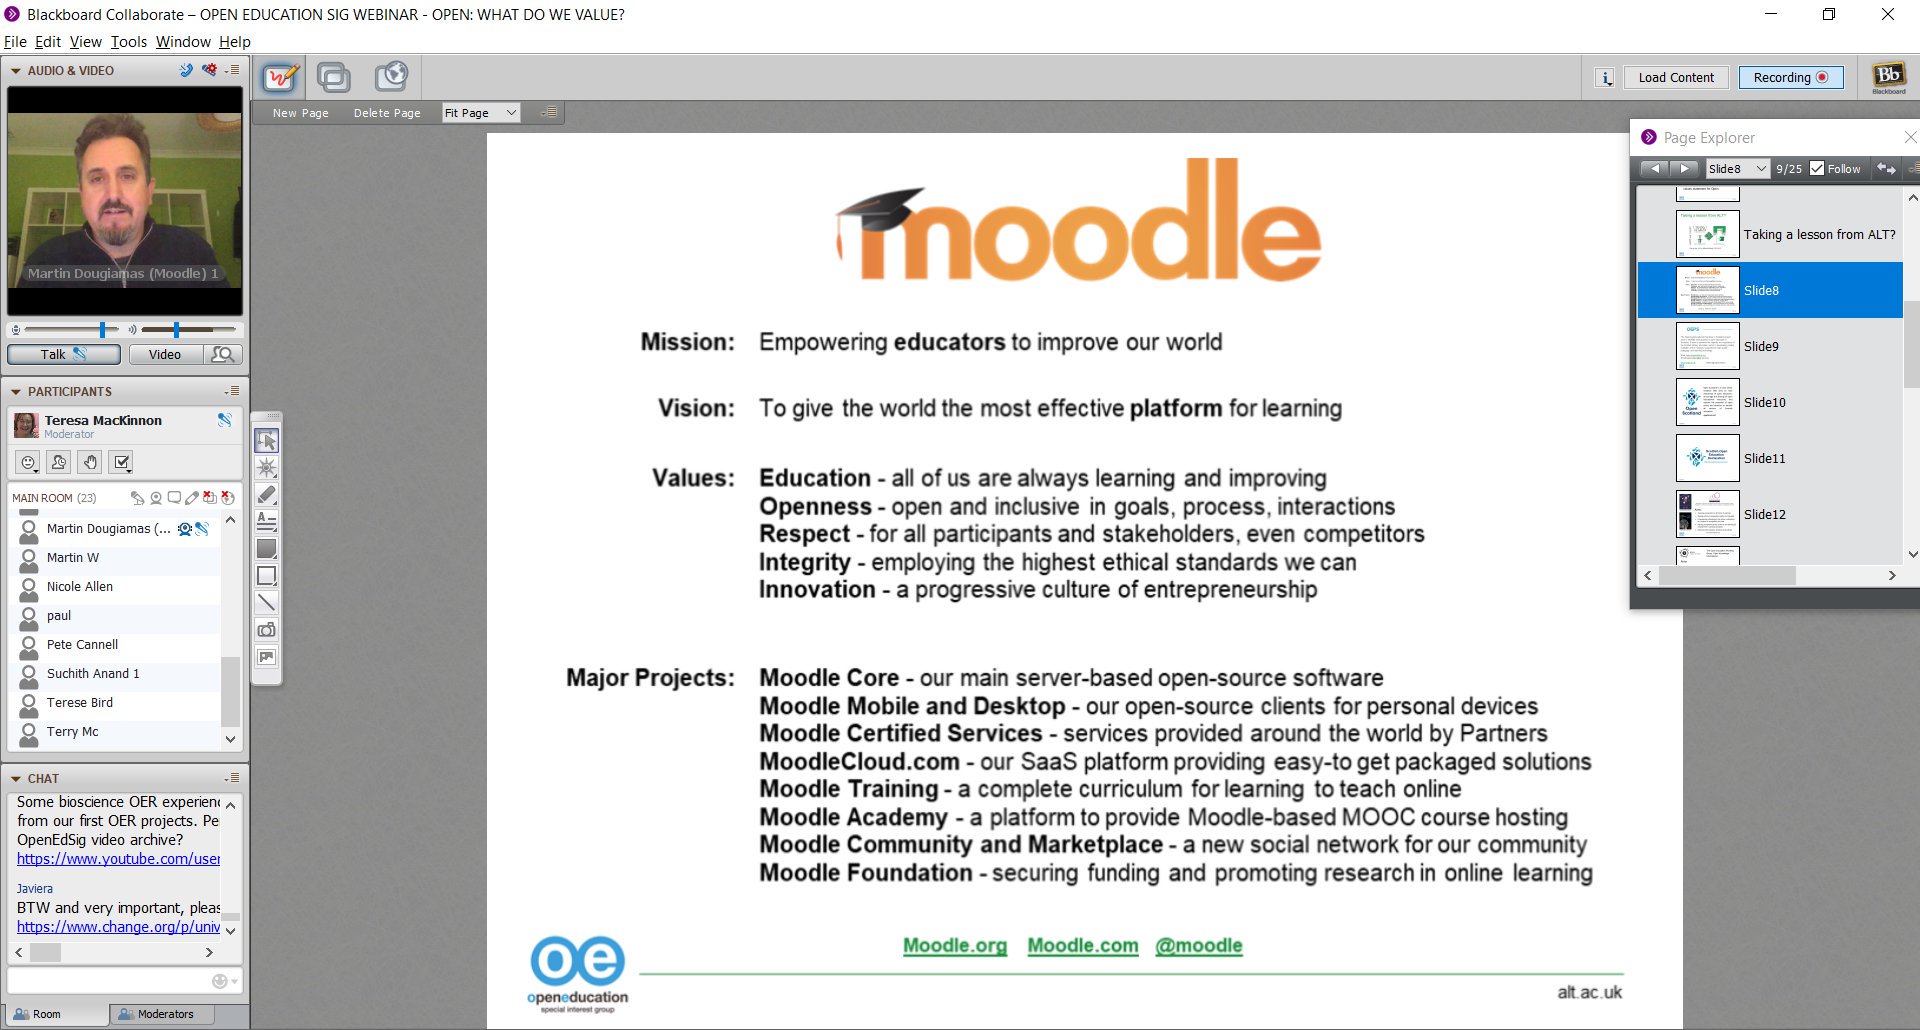 great to have @moodler in the room! #openedsig https://t.co/oOgUyik8rF